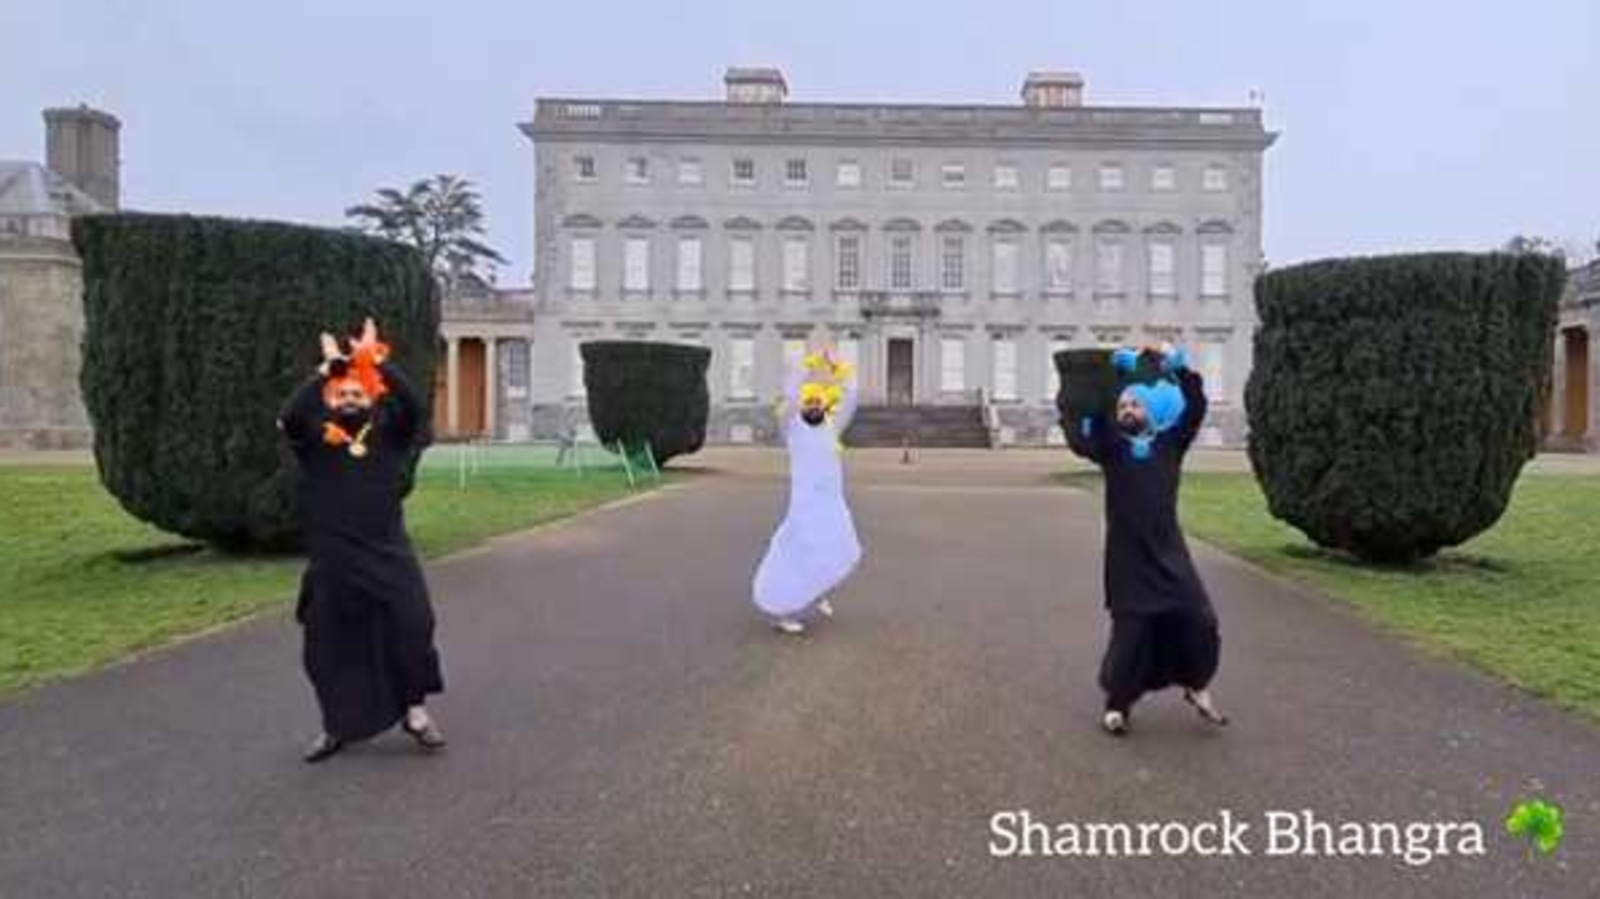 Dancers give an Irish twist to bhangra in this amazing video